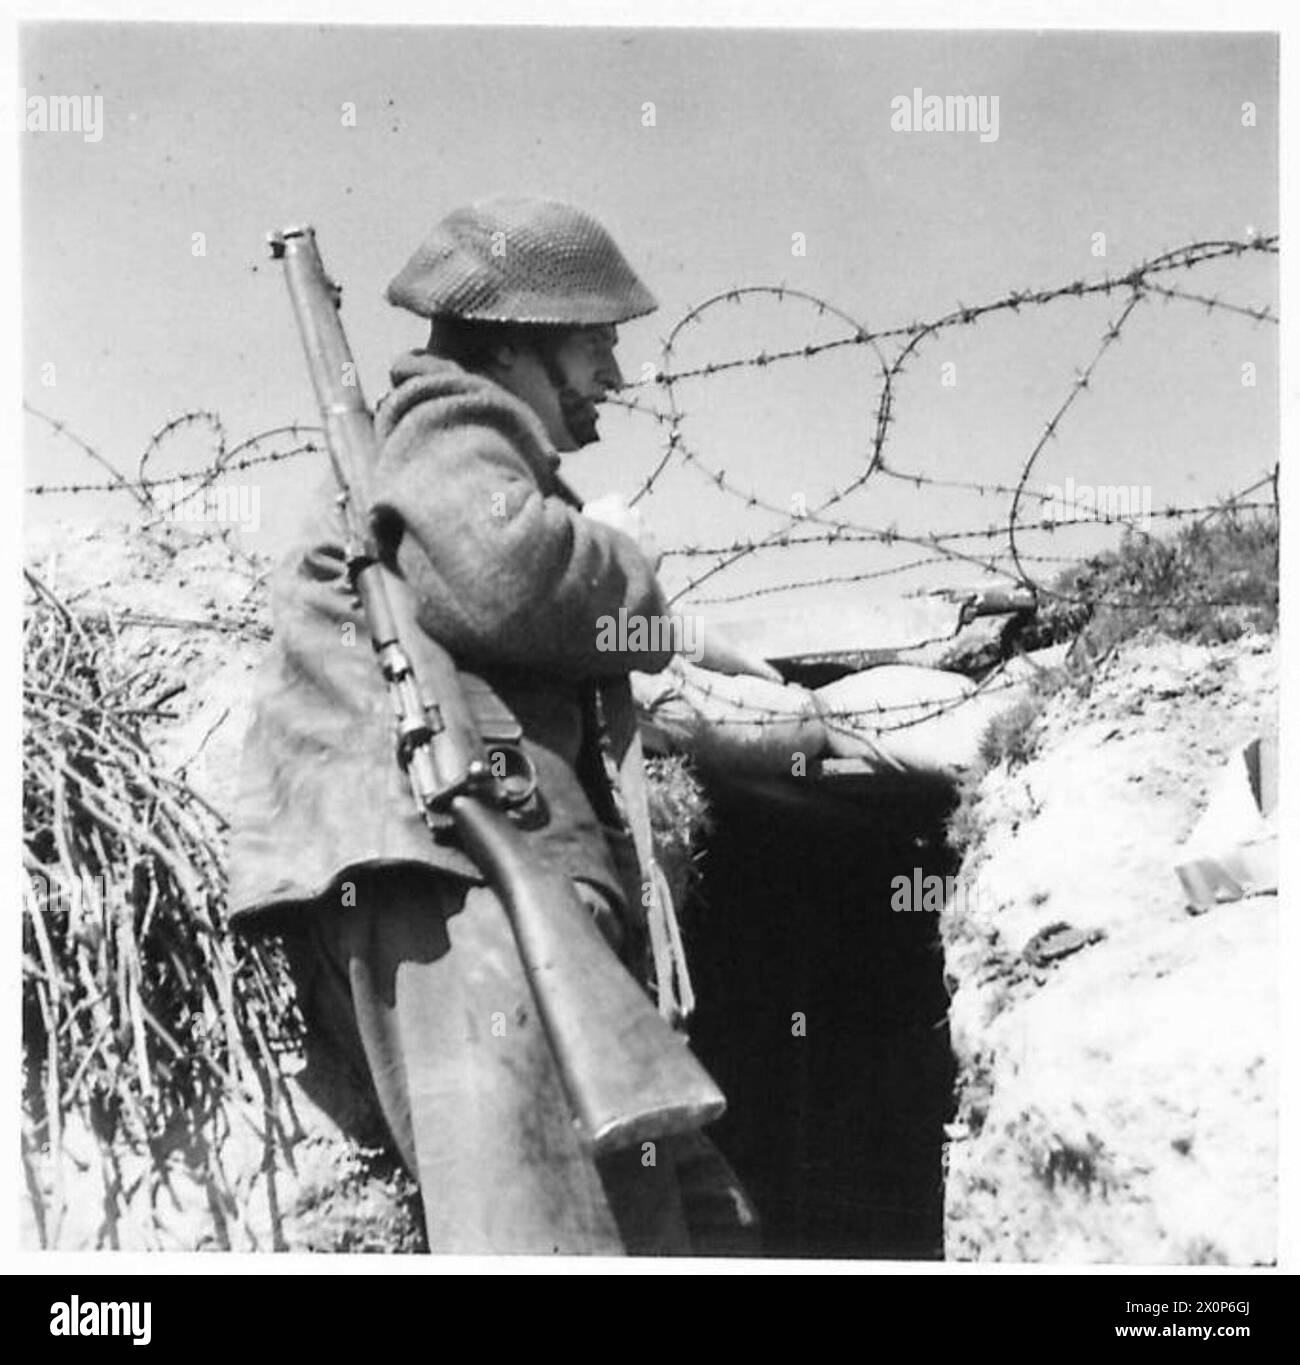 THE BRITISH ARMY IN NORTH AFRICA, SICILY, ITALY, THE BALKANS AND AUSTRIA 1942-1946 - Tpr. Merridy of 16 Union Street, Hulme, Manchester, keepes a good look-out across the river Reno. Photographic negative , British Army Stock Photo